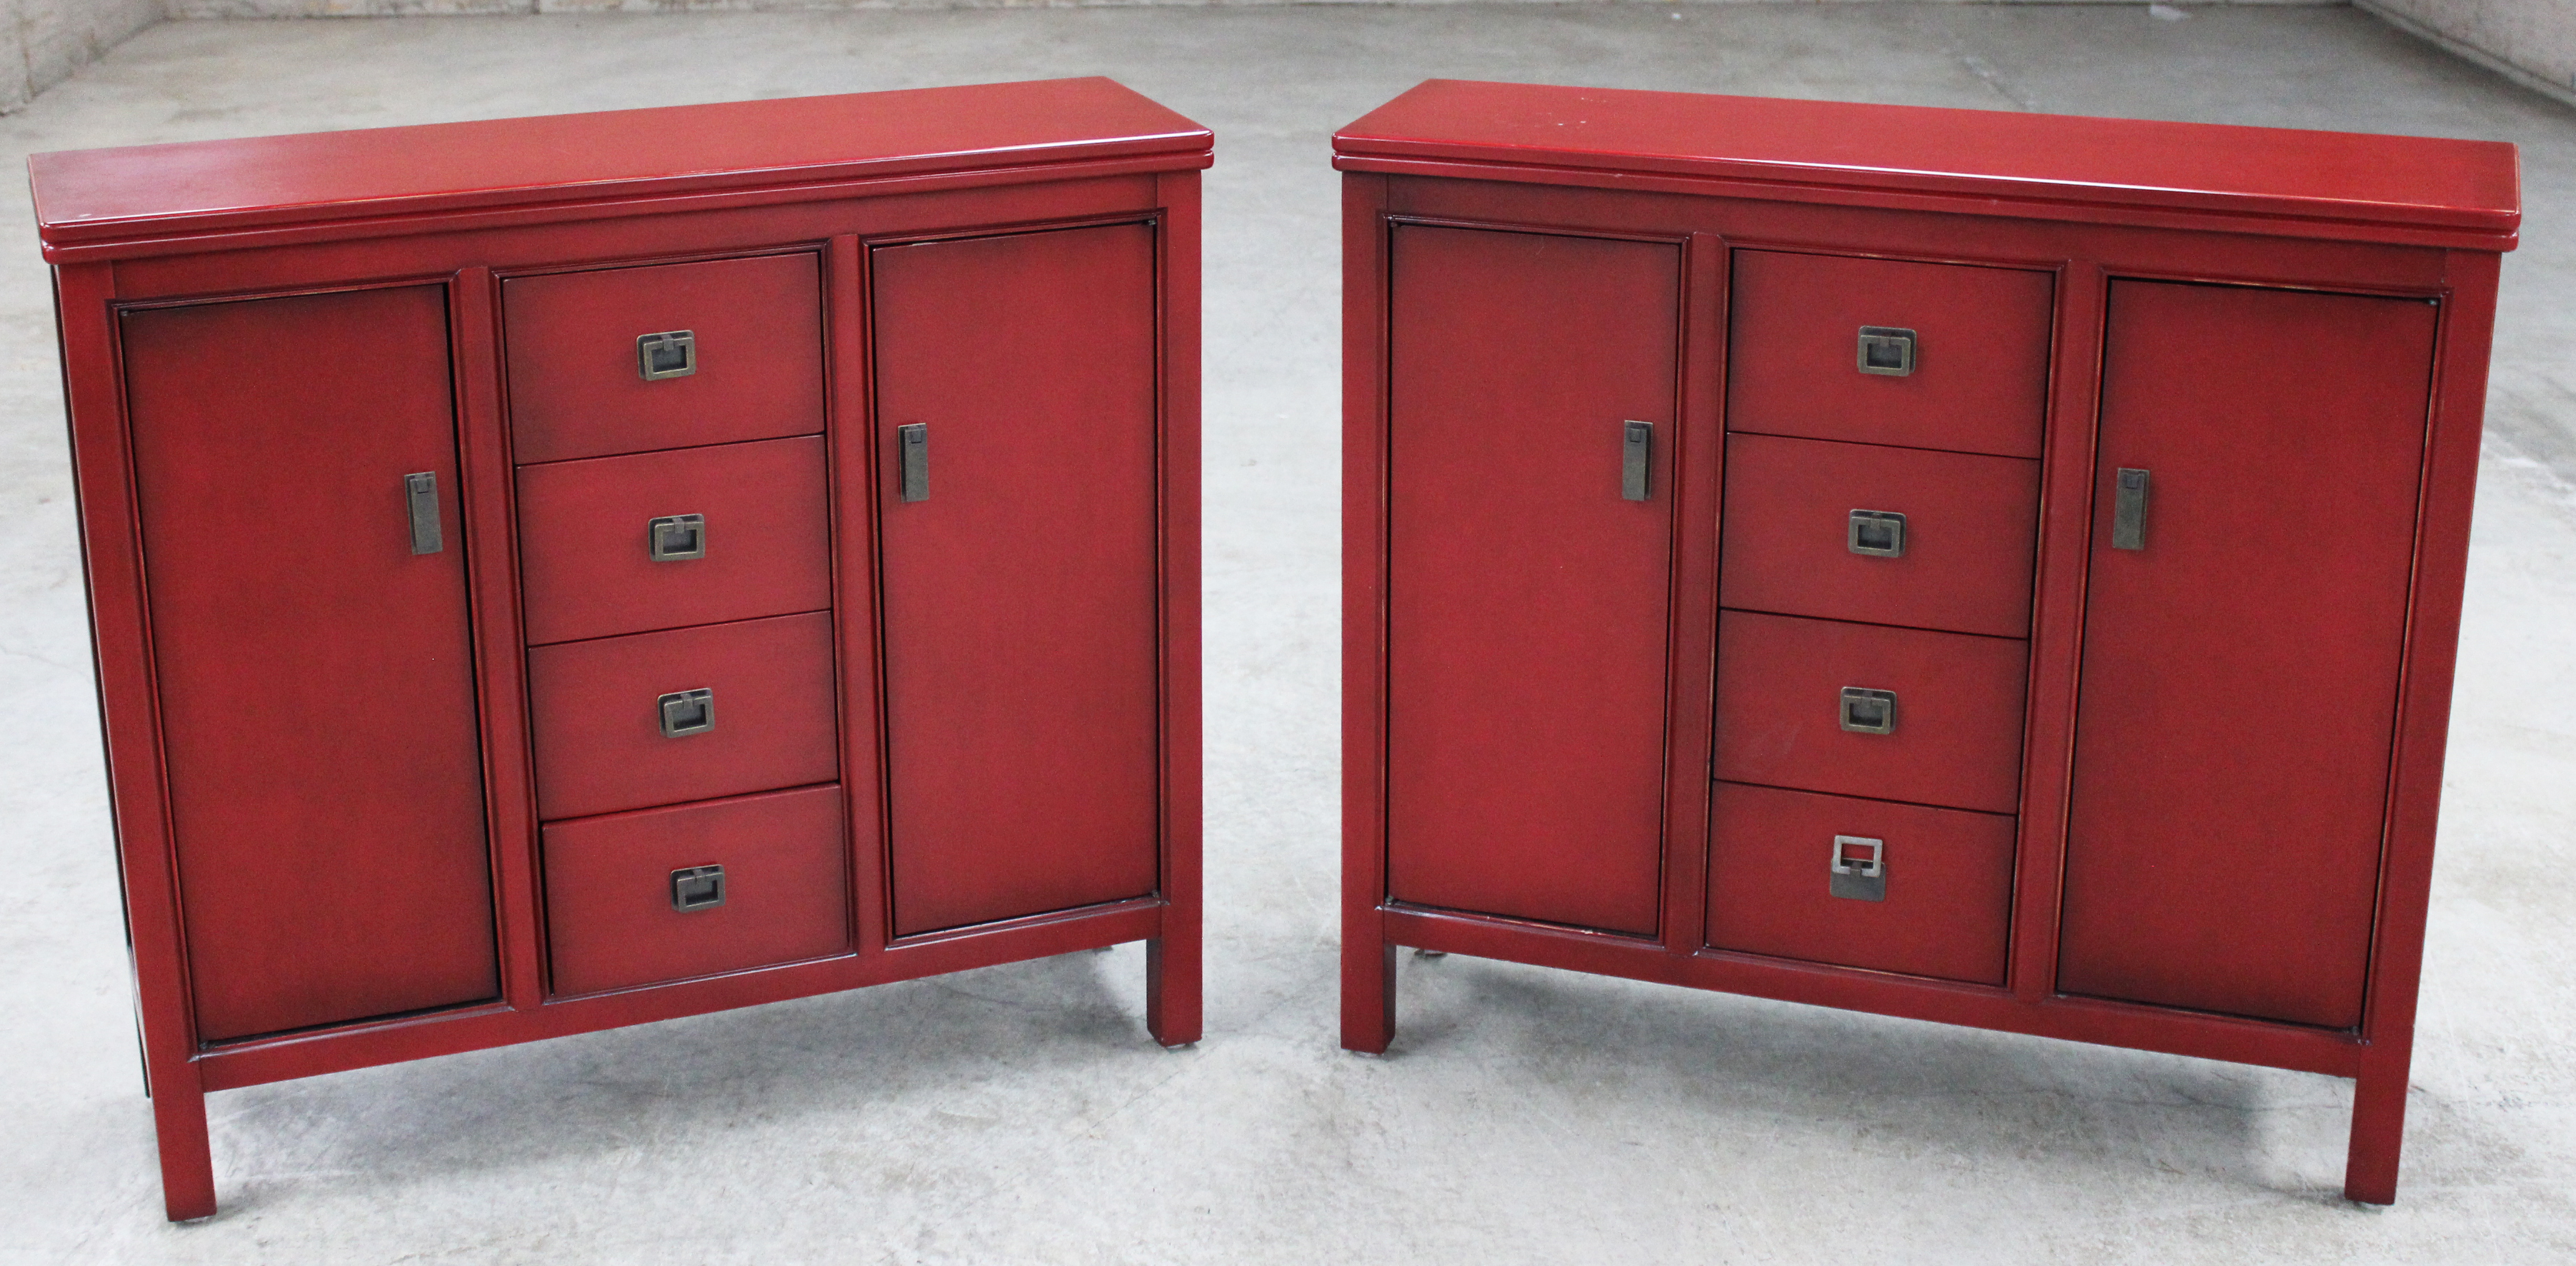 PAIR OF MODERN RED LACQUER BUFFET 2c8c14